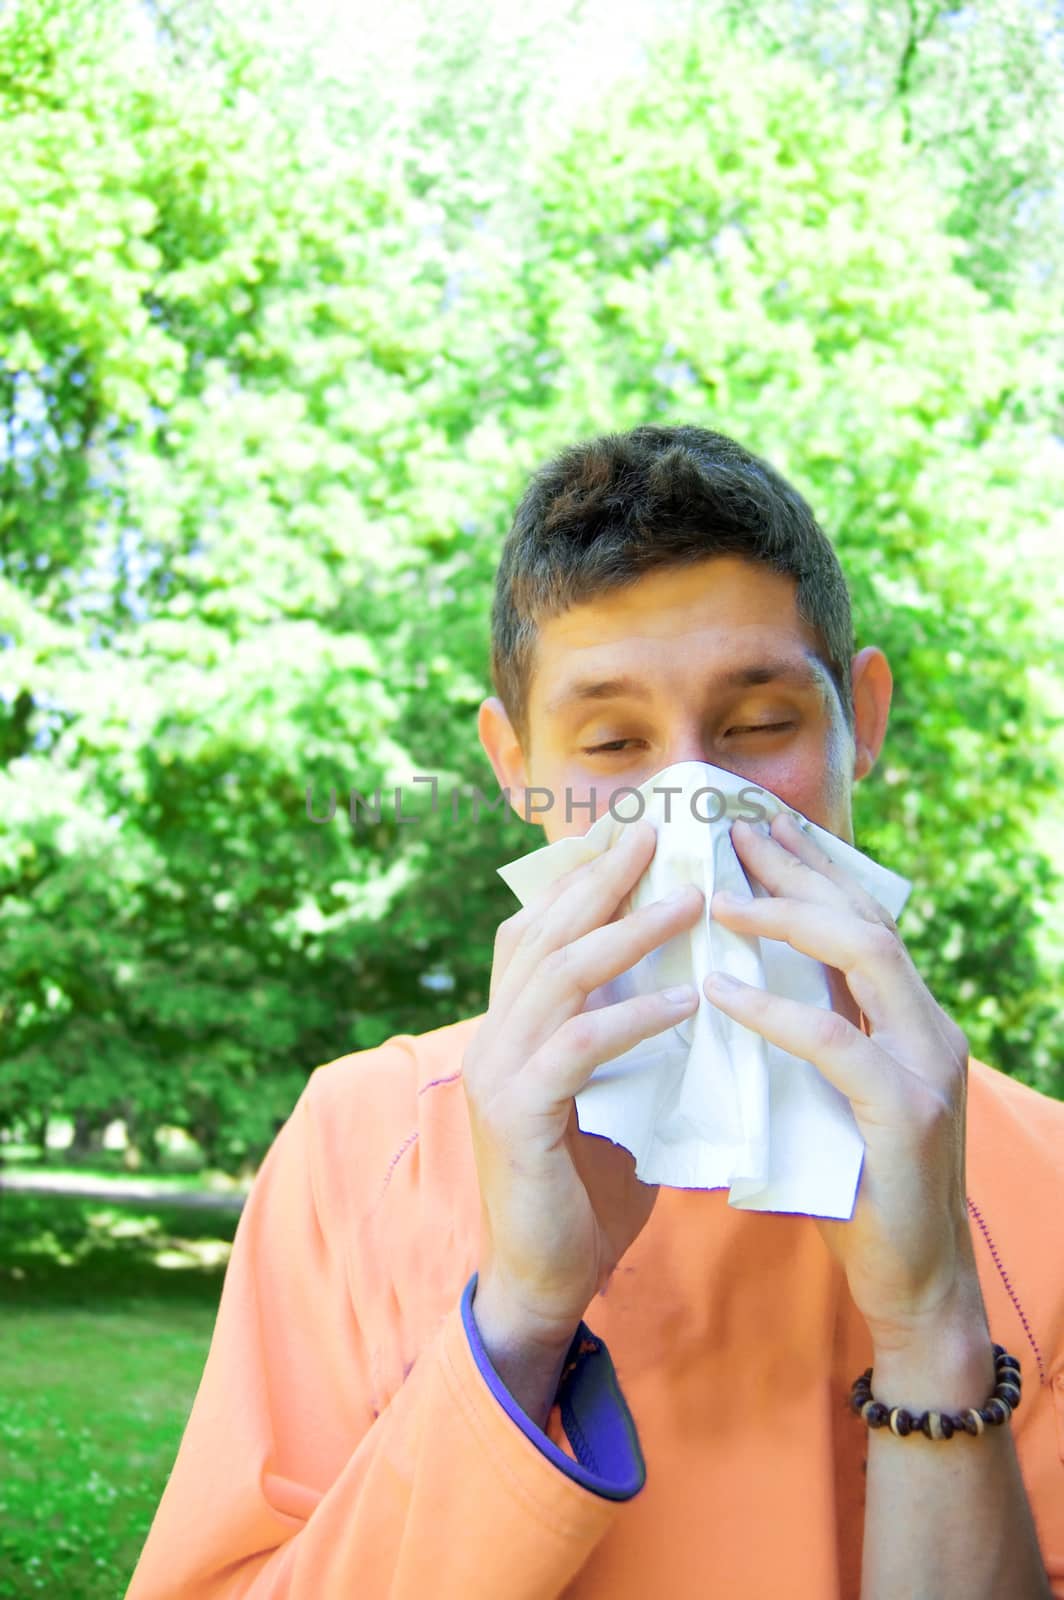 Young man blowing his nose because he has allergies.